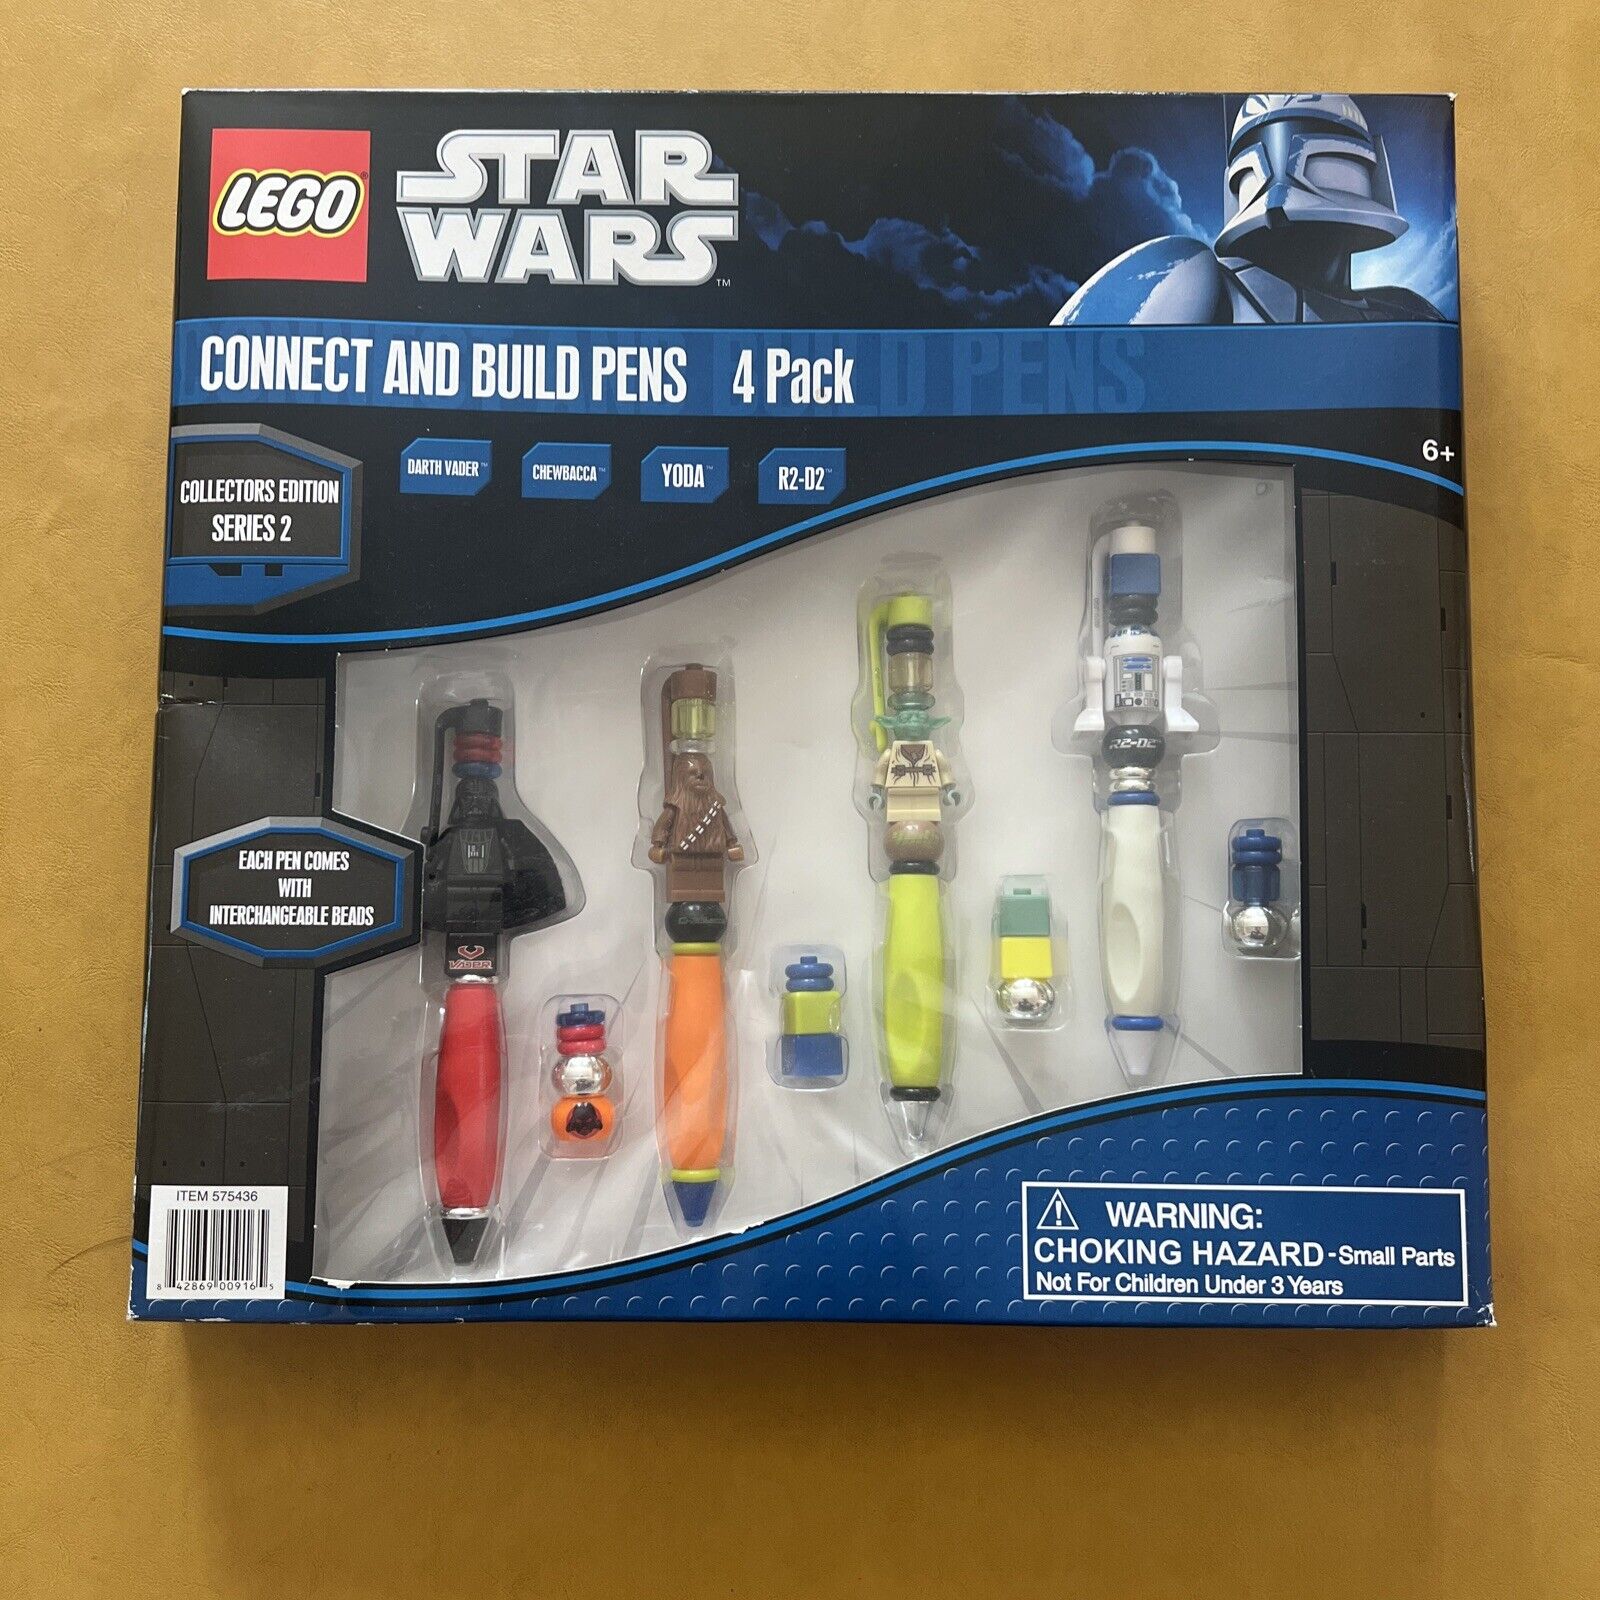 LEGO Collector’s Edition Star Wars Set of 4 Pack Connect and Build Pens w/ Beads